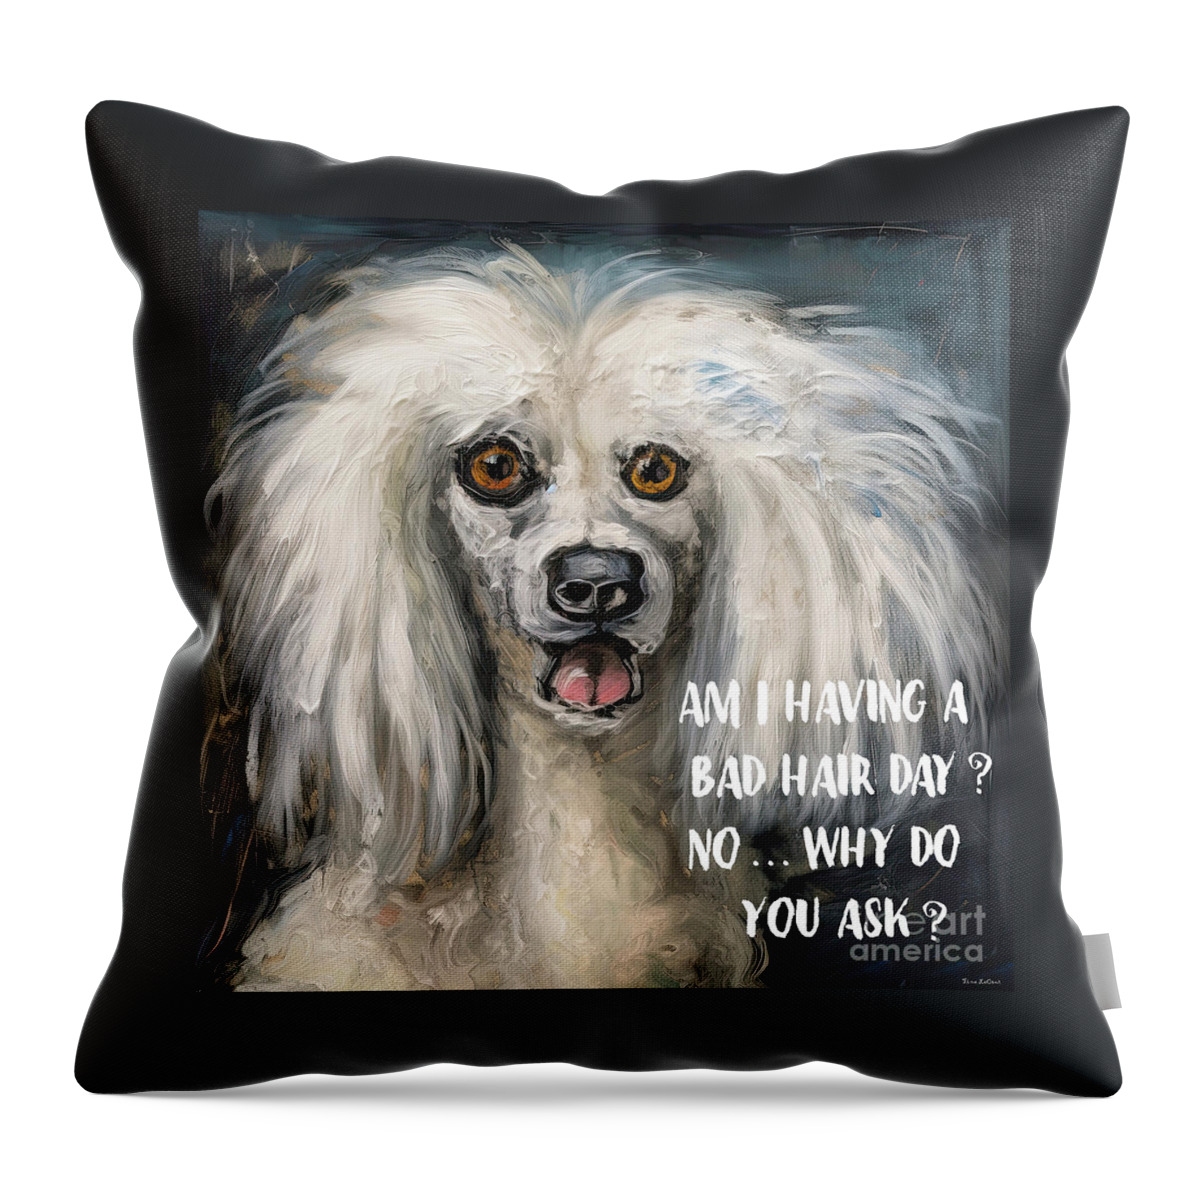 Bad Hair Day Throw Pillow featuring the painting Having A Bad Hair Day by Tina LeCour